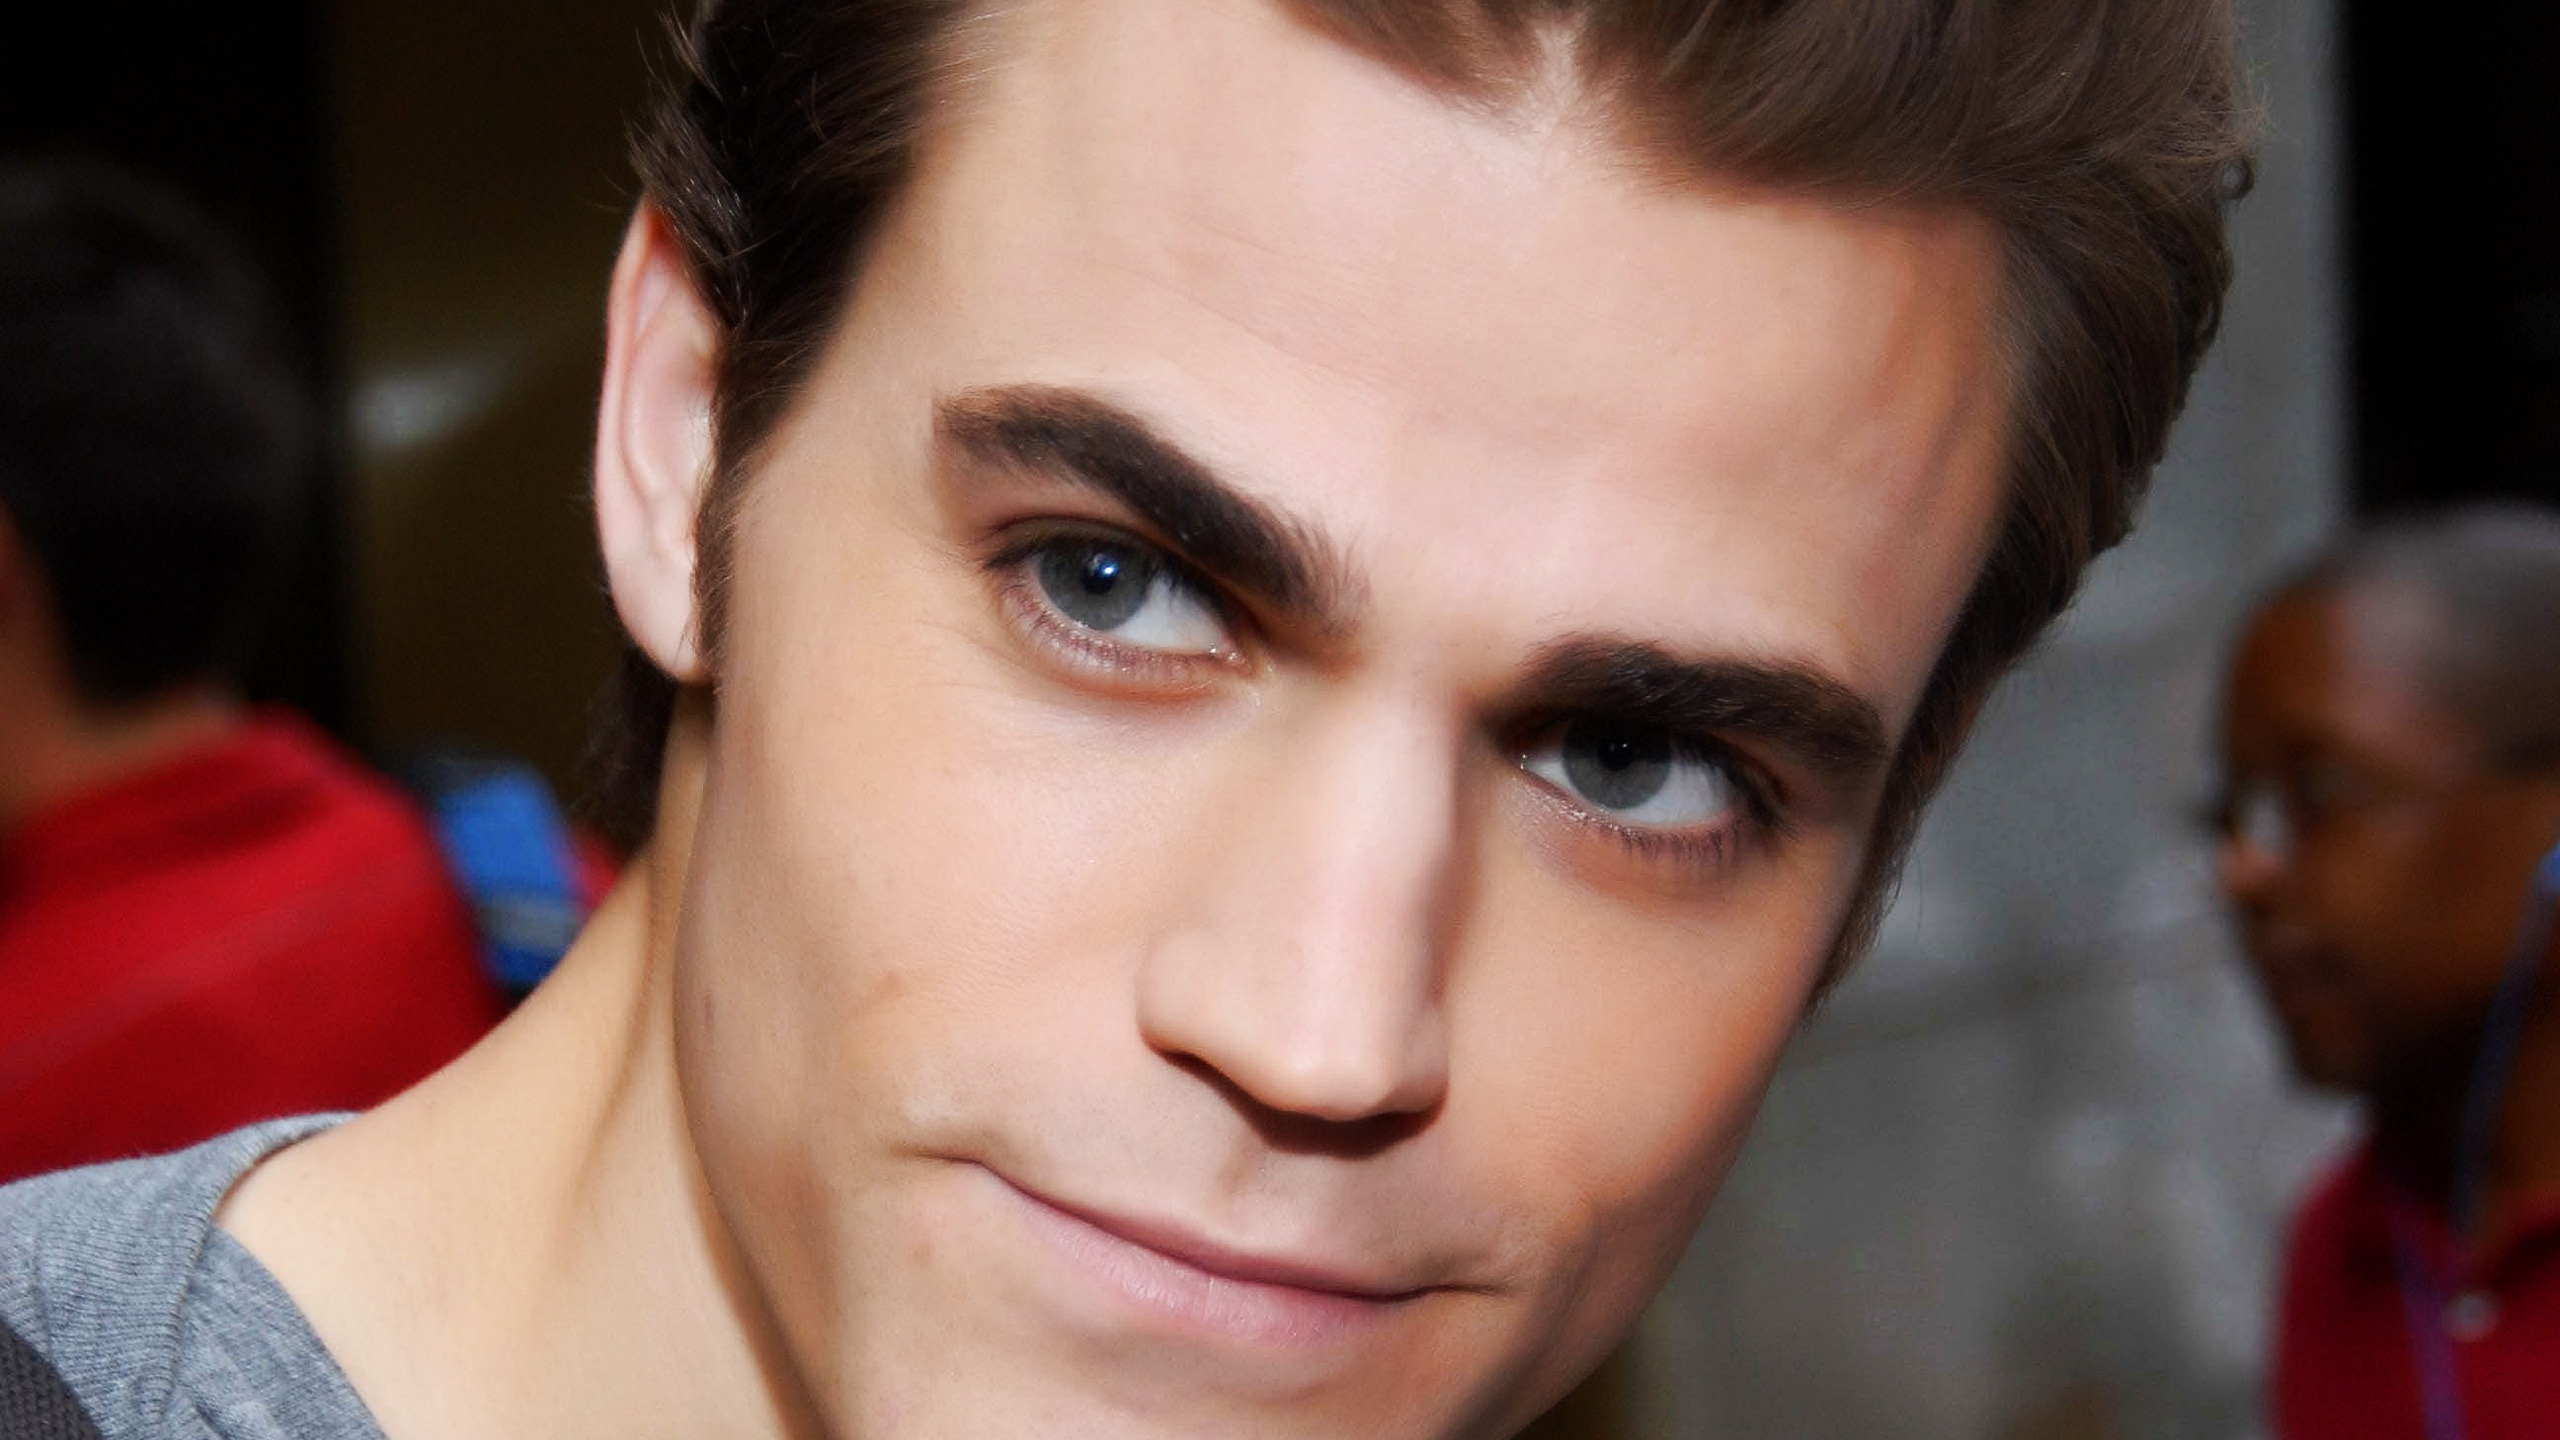 Paul Wesley Close Up for 2560x1440 HDTV resolution